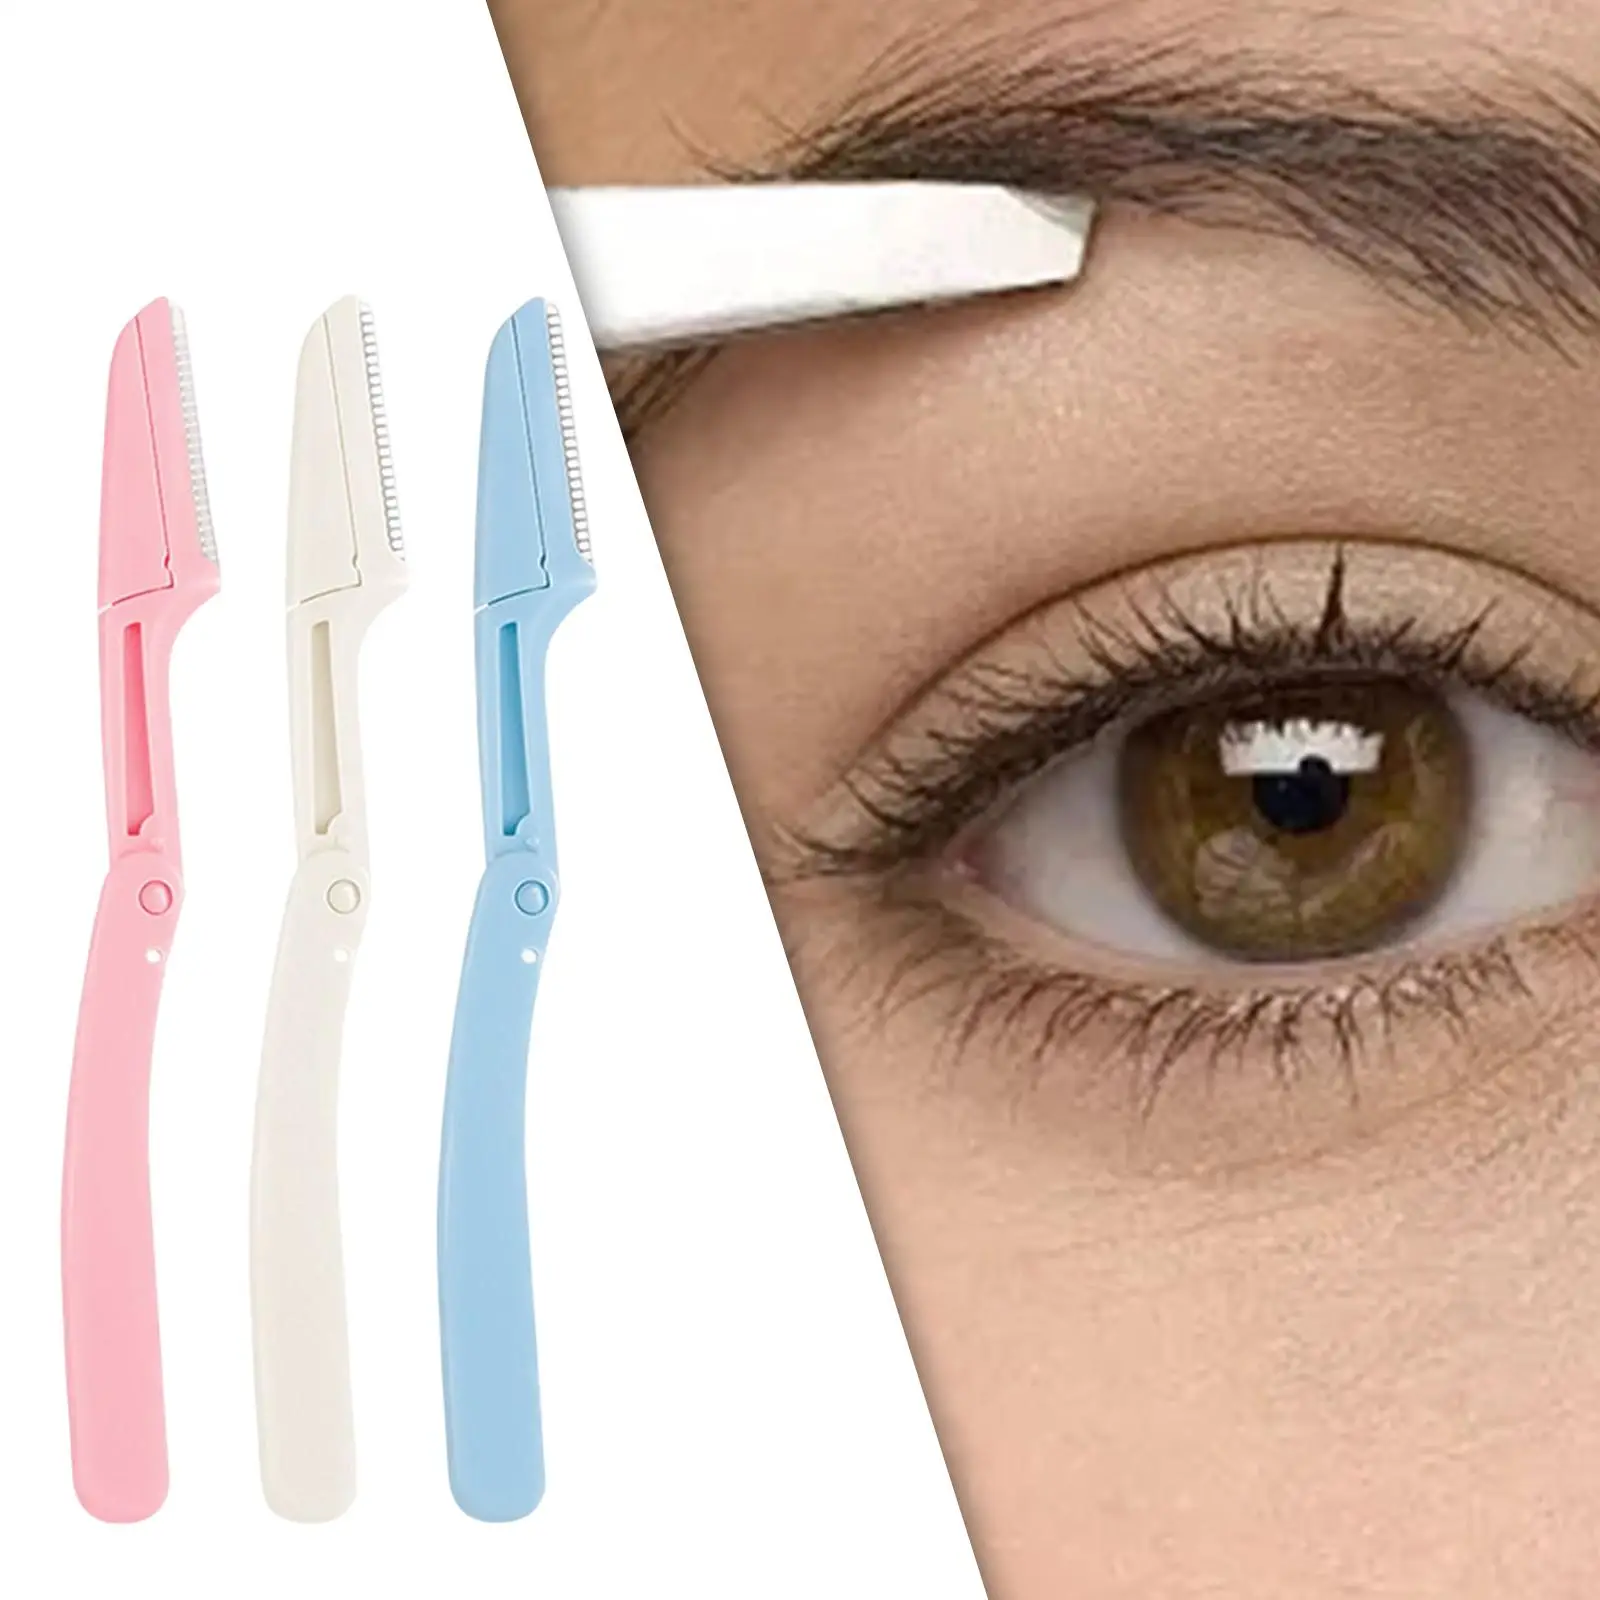 3x Foldable Eyebrow Shaper Shaping Handheld Reusable Groomer Smoothing Trimming Facial Hair Remover for Chin Legs Home Salon